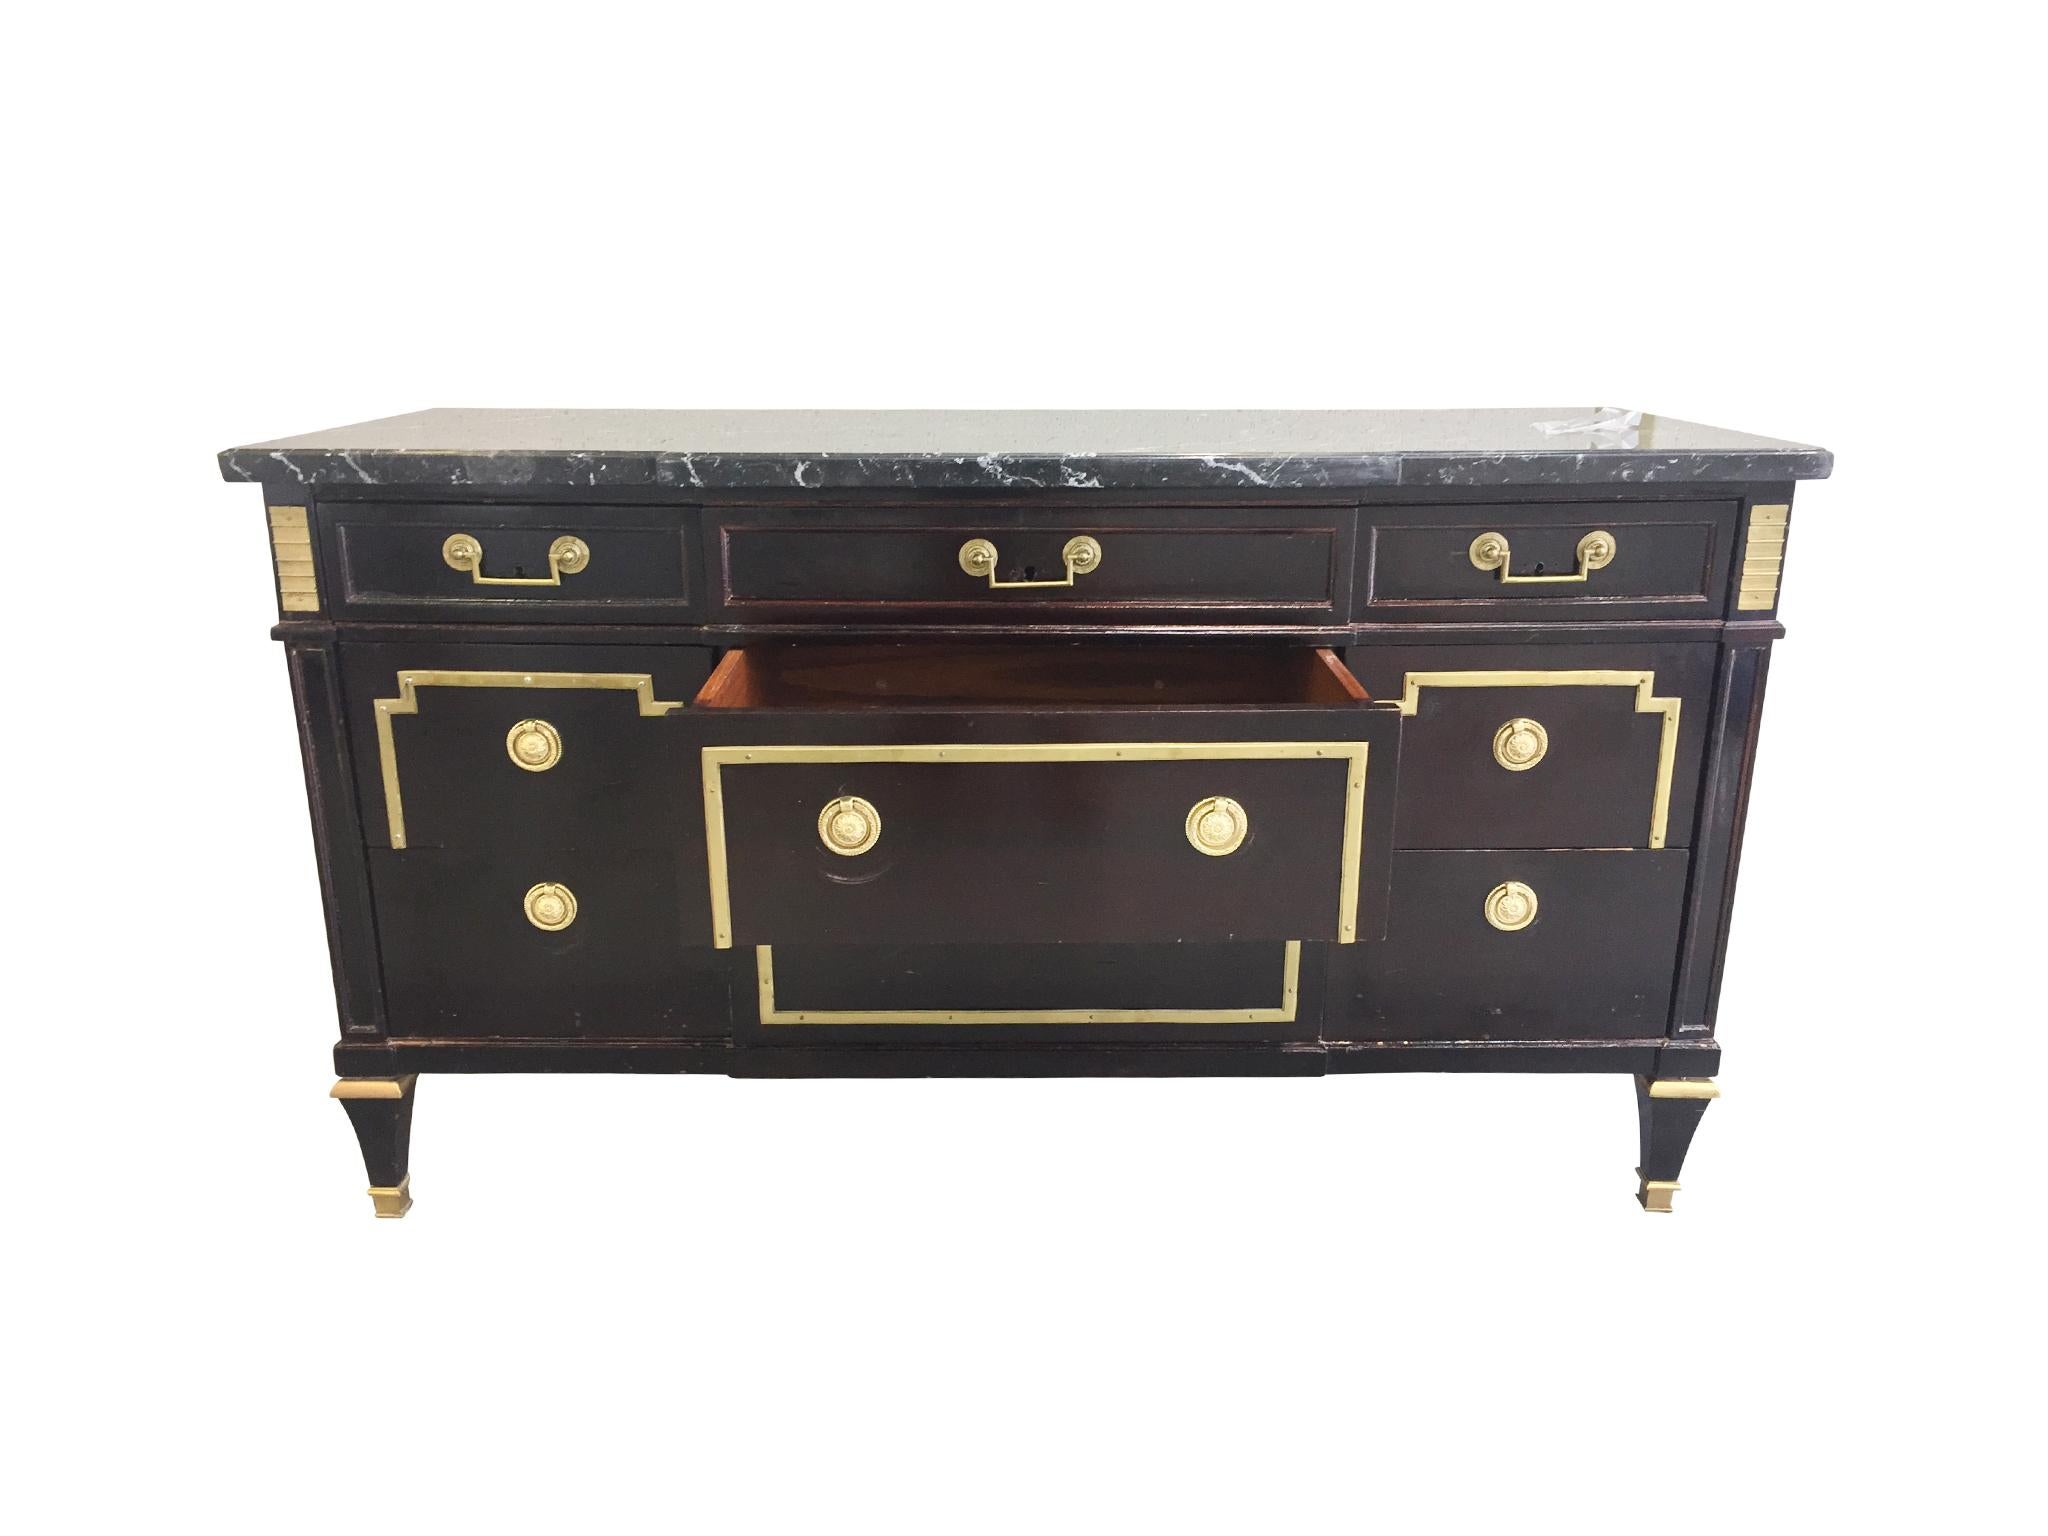 An elegant 1940s chest of drawers consisting of lacquered wood, gilt detailing, and a marble top. It is designed in a neoclassical style. The wood has a warm dark-brown color, while the trims and pulls are gilt metal that beautifully complements the